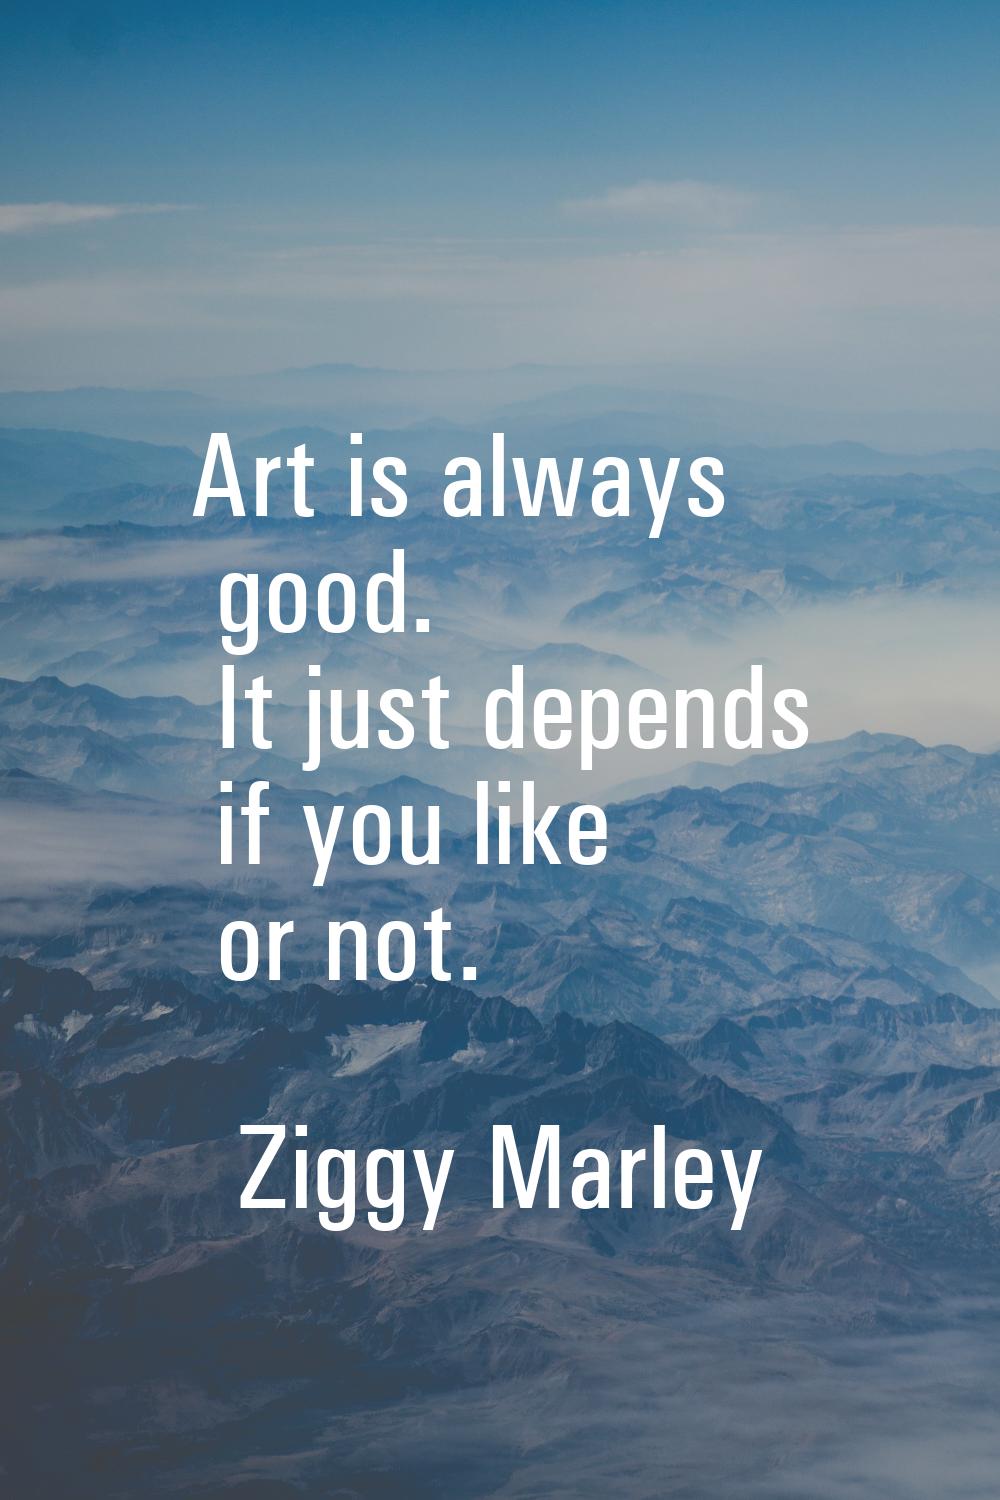 Art is always good. It just depends if you like or not.